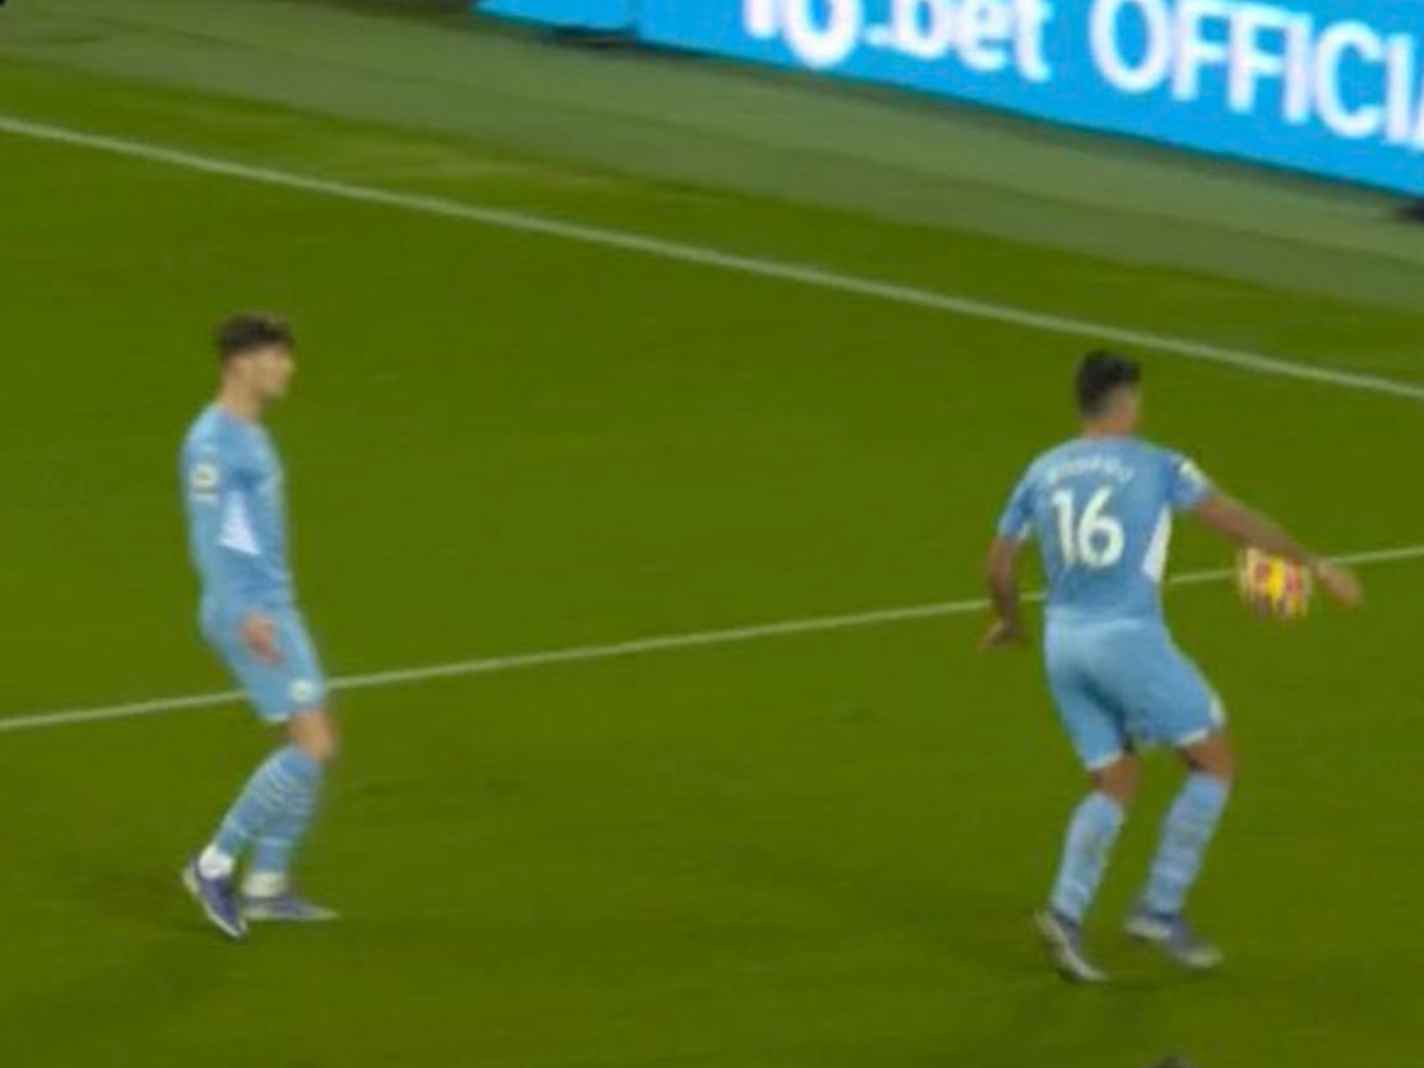 That should have been a penalty for Everton after the most obvious handball from Rodri